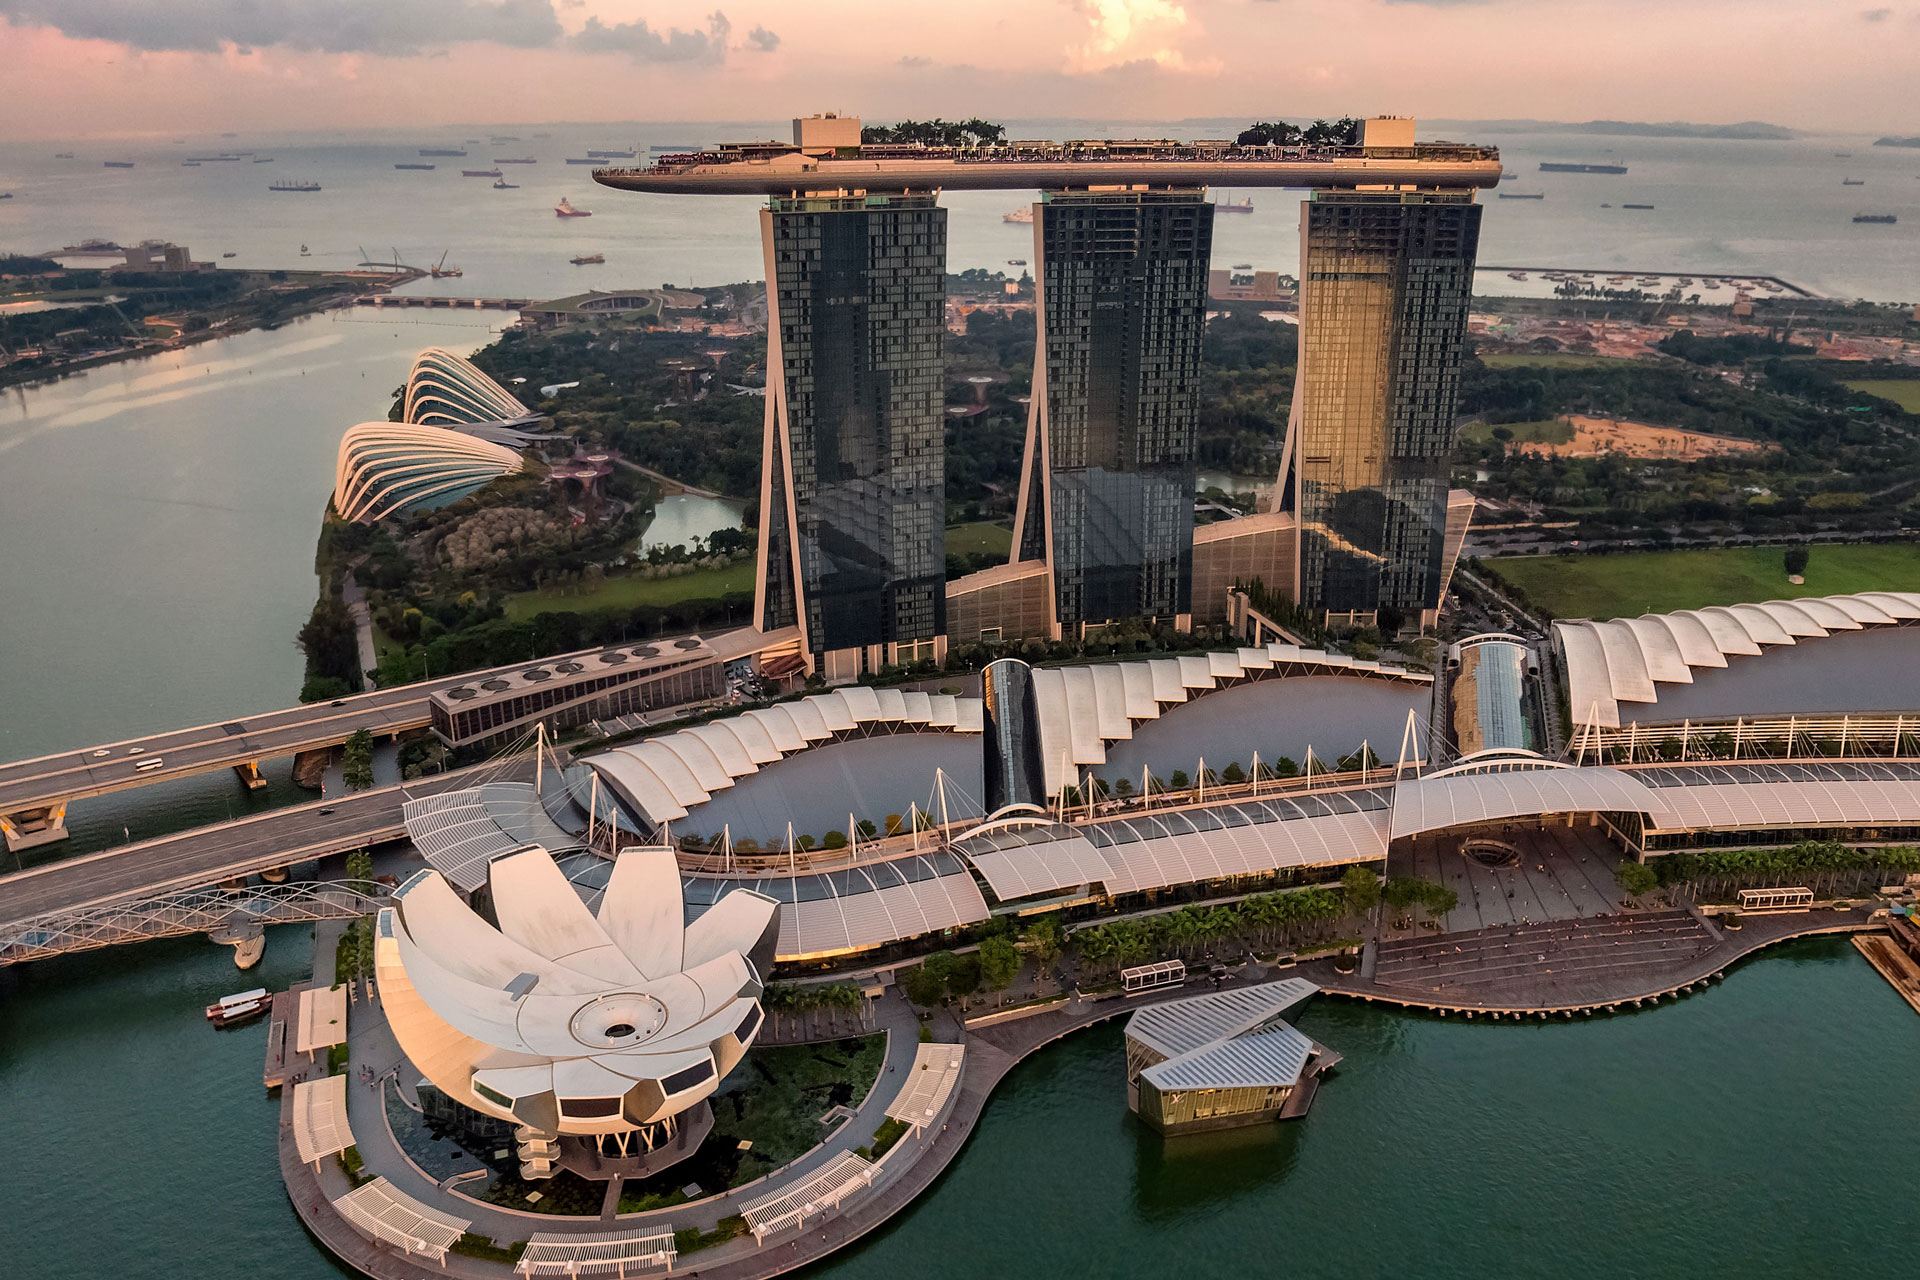 A sample of business process outsourcing project Marina Bay Sands in Singapore